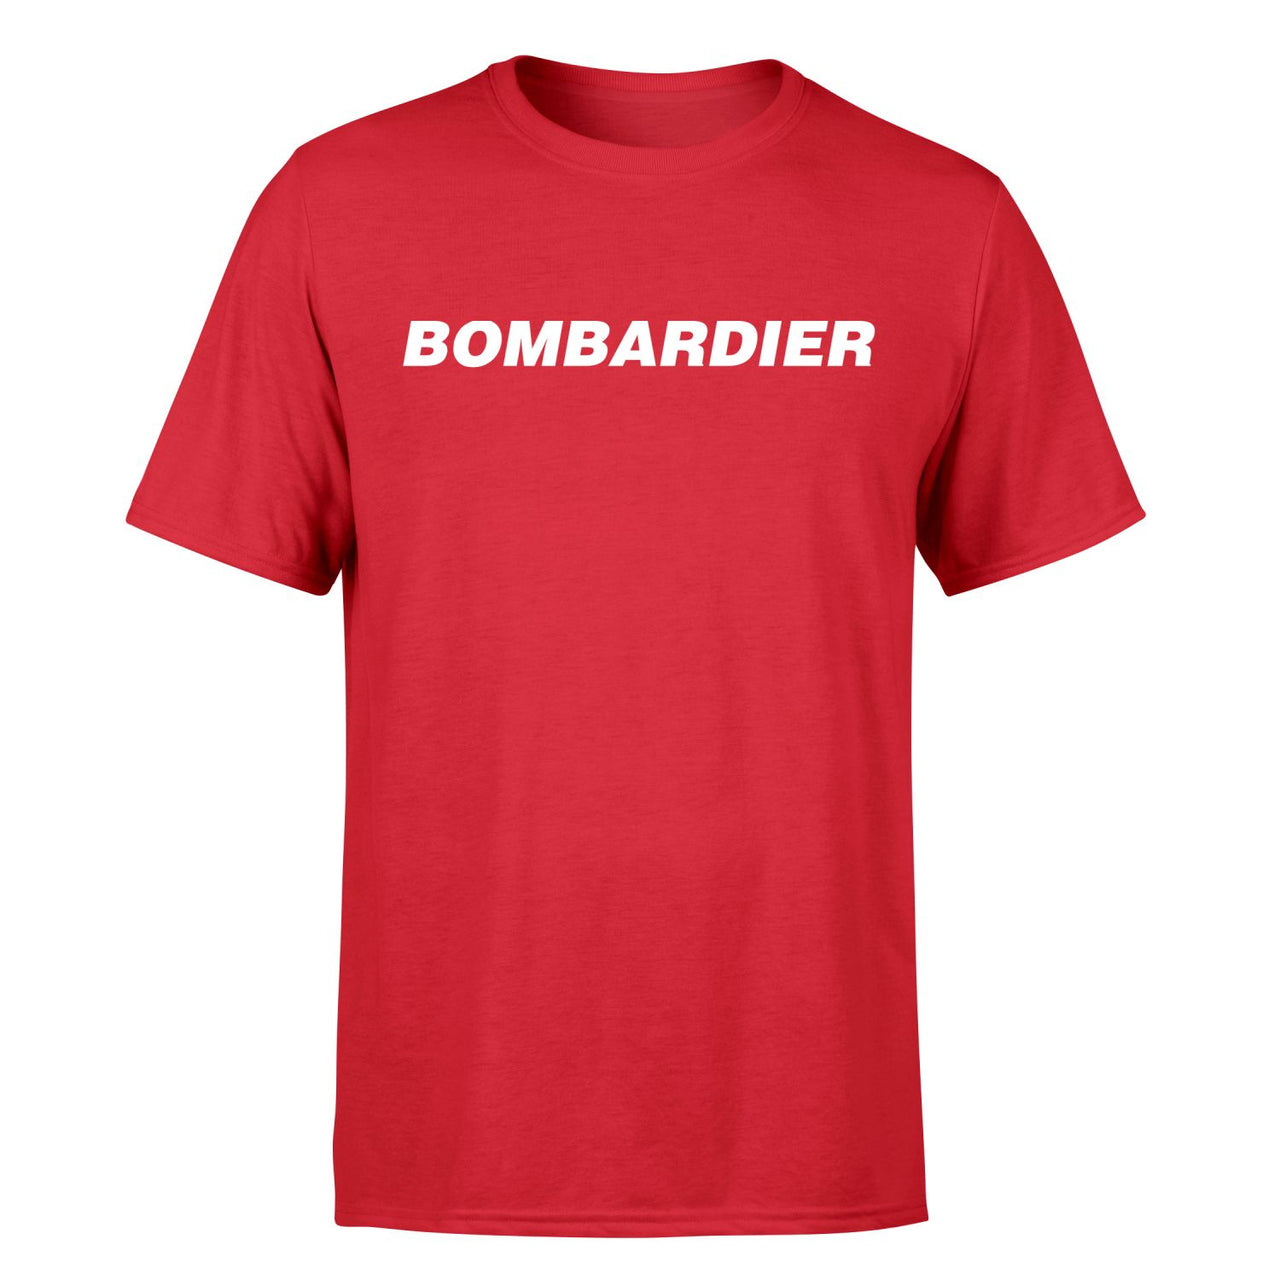 Bombardier & Text Designed T-Shirts